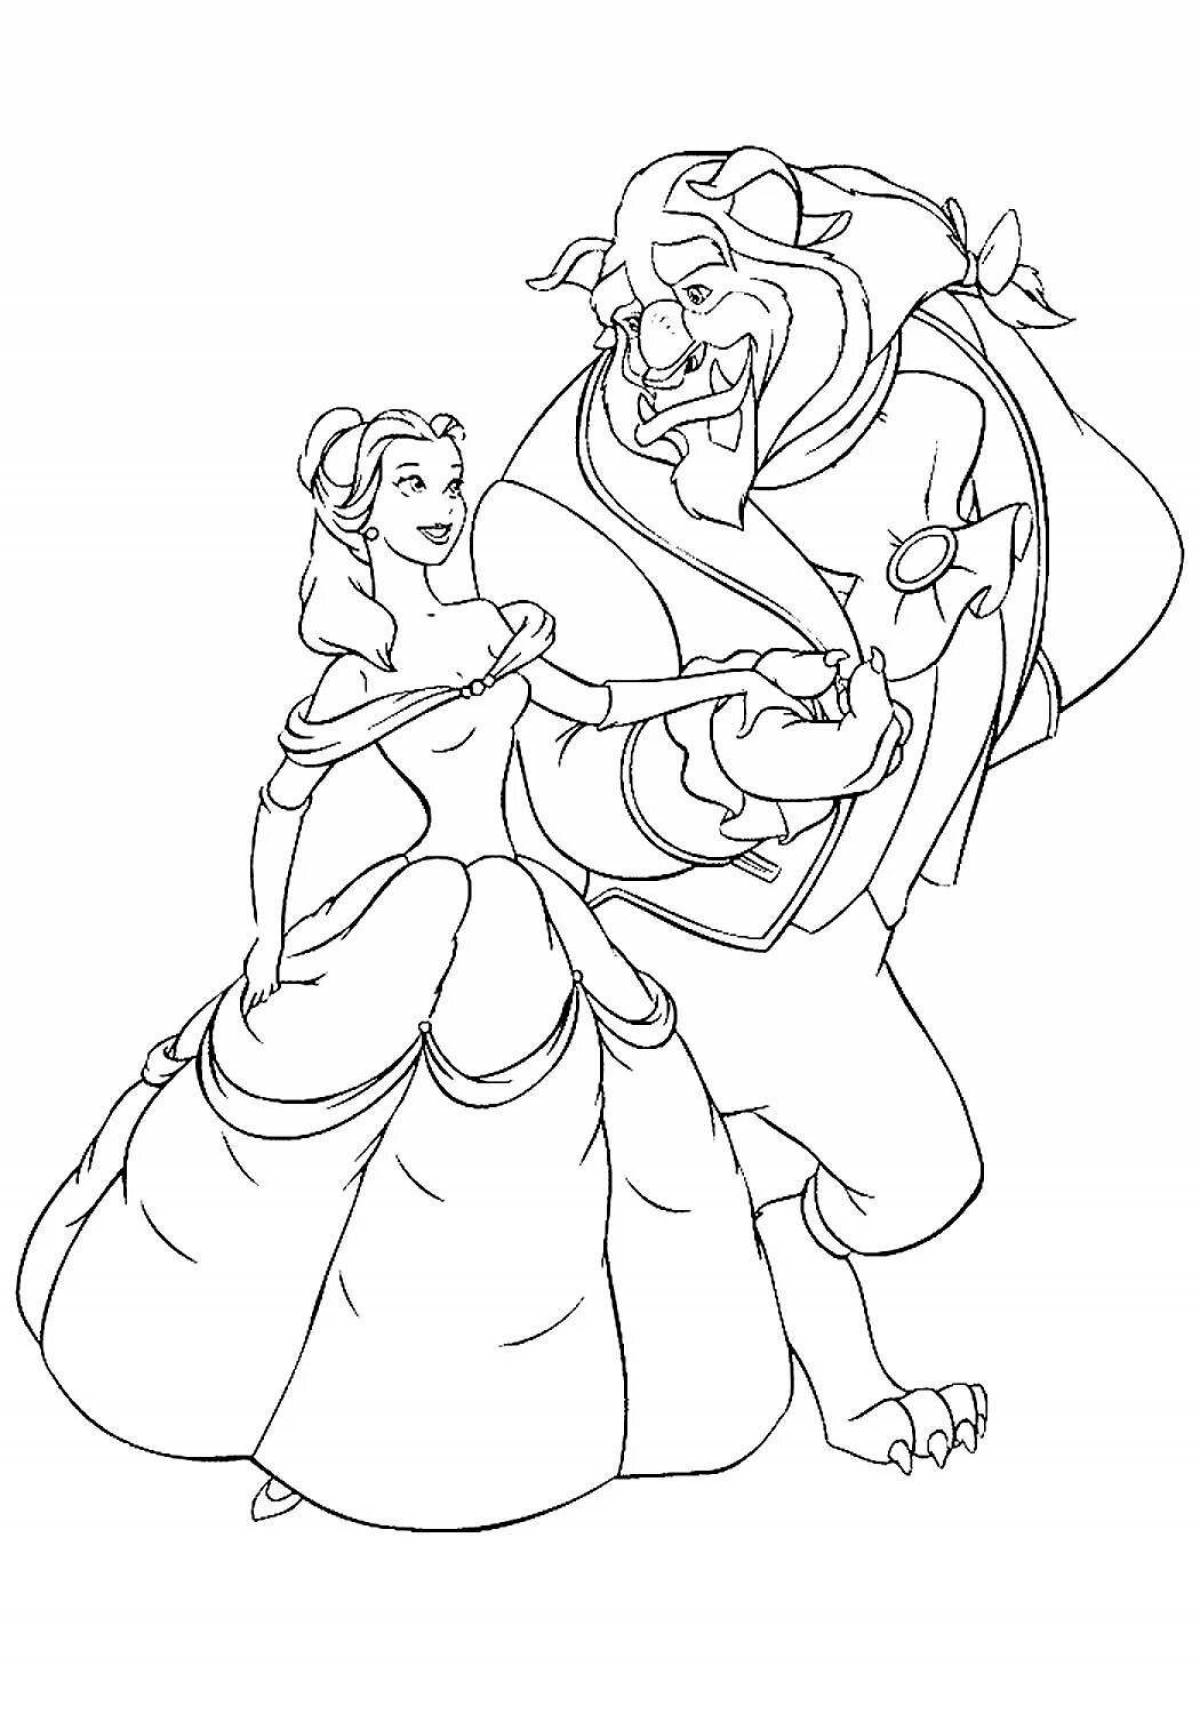 Belle and monster glitter coloring pages